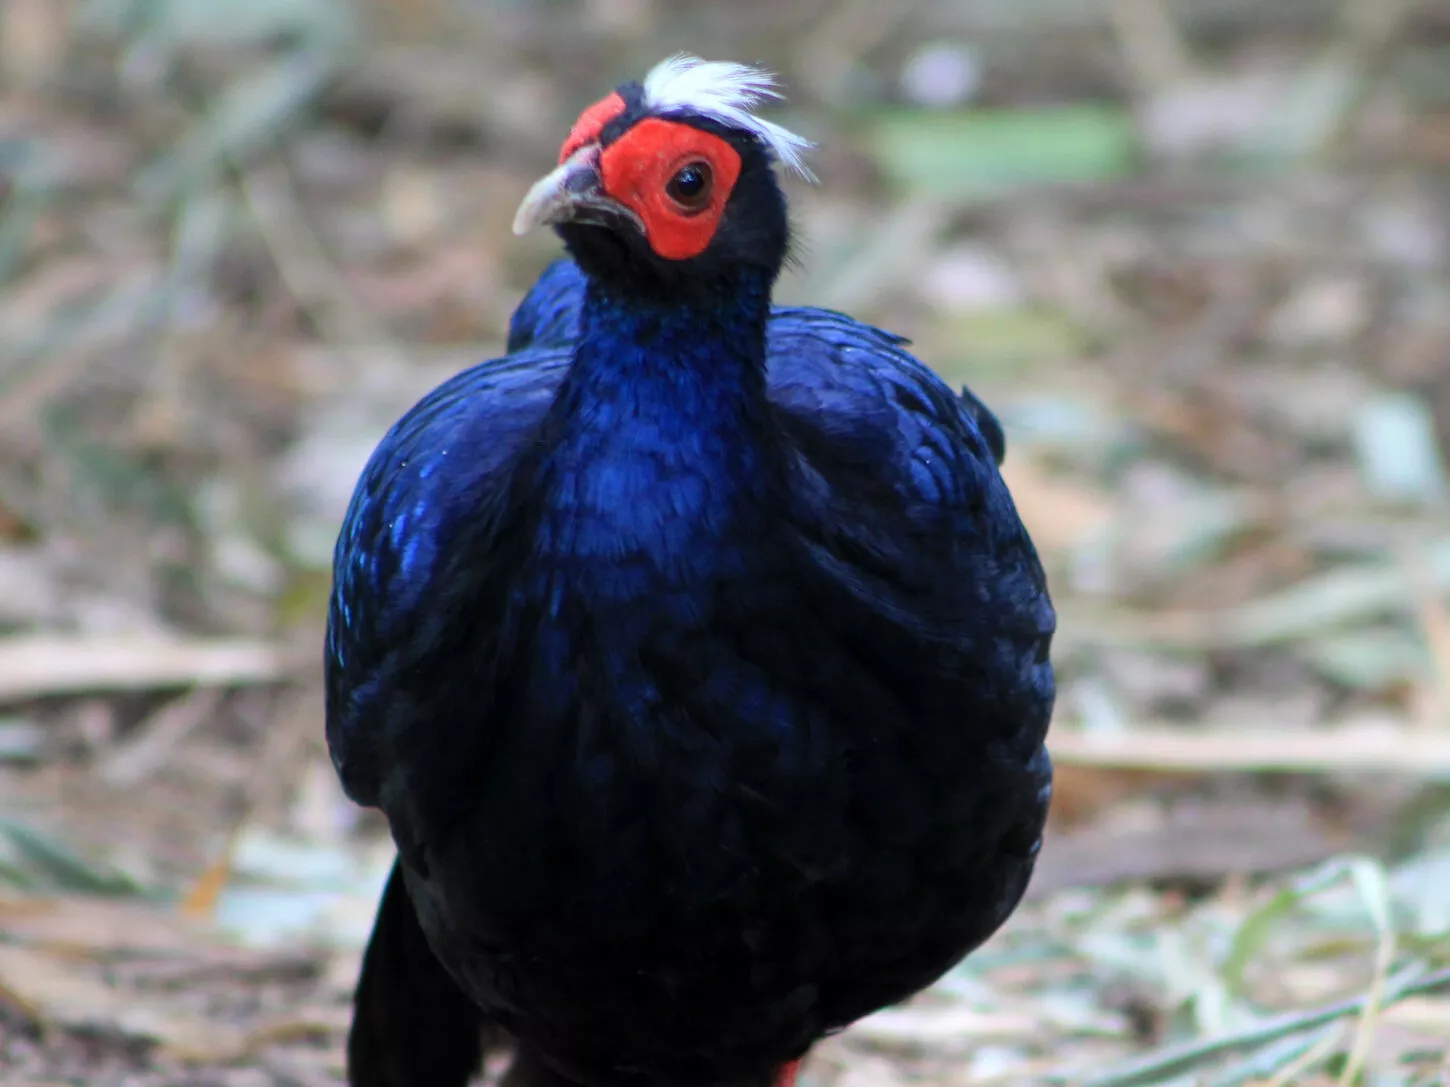 Male Vietnam Pheasant on the naturalistic grounds.